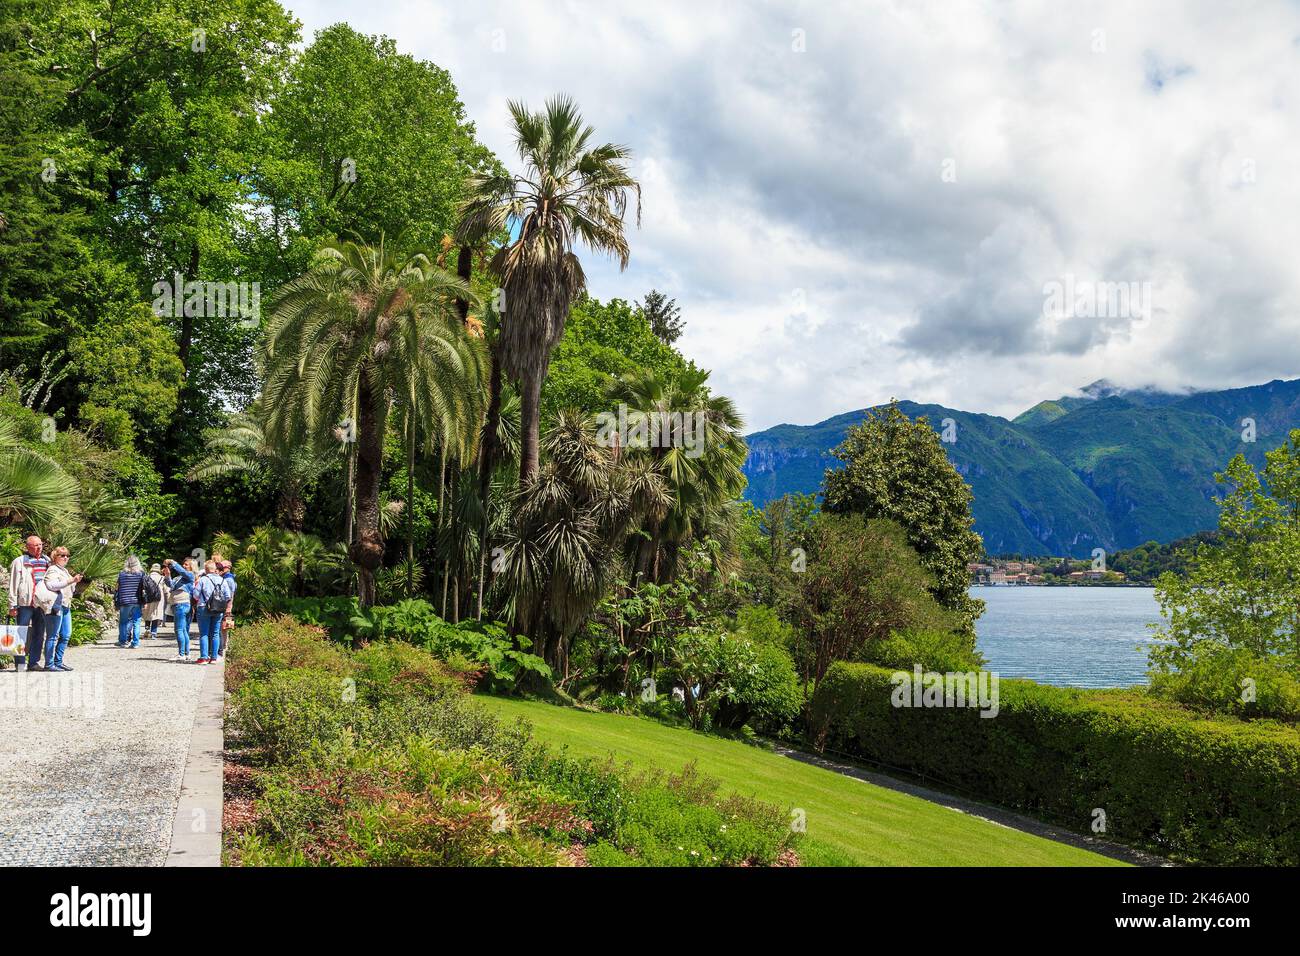 TREMEZZO, ITALY - MAY 14, 2018: This is an alley of the botanical garden at Villa Carlotta on the shores of Lake Como. Stock Photo